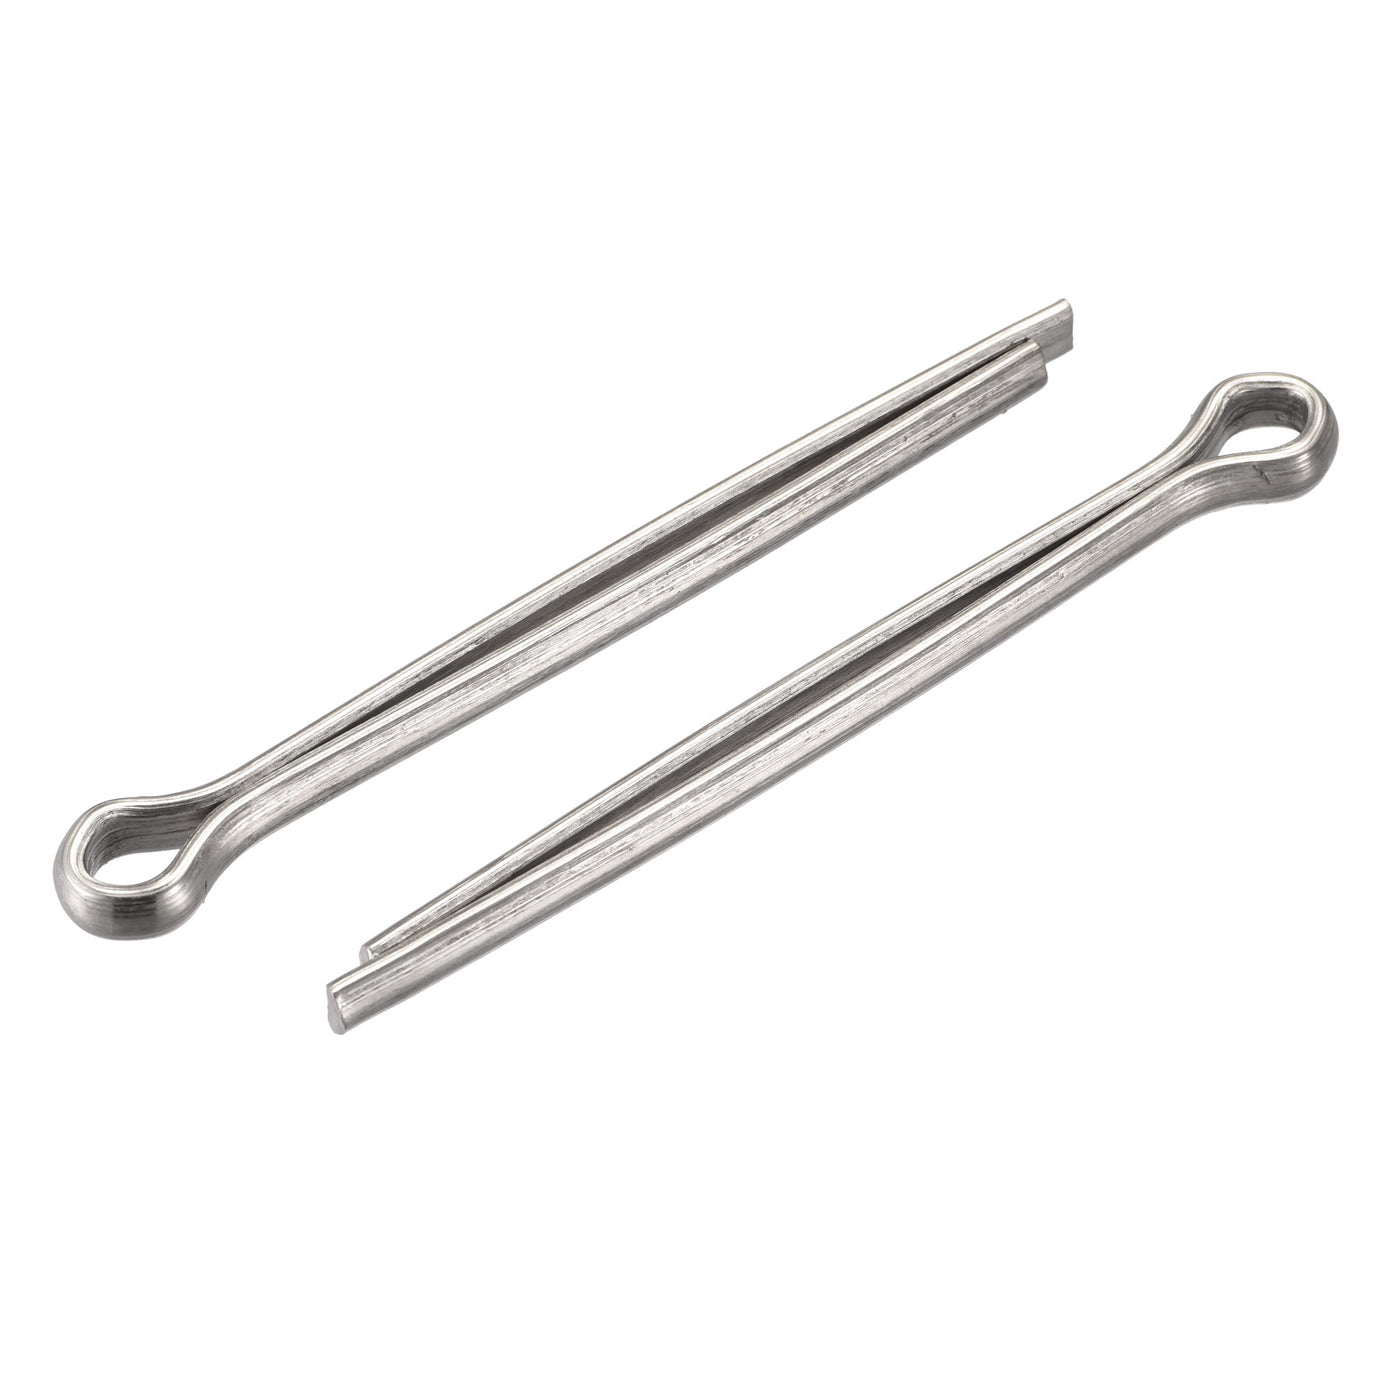 uxcell Uxcell Cotter Pins, 8mm x 100mm 304 Stainless Steel Clip Fastener Fitting for Automotive, Mechanics, Silver Tone, 2Pcs